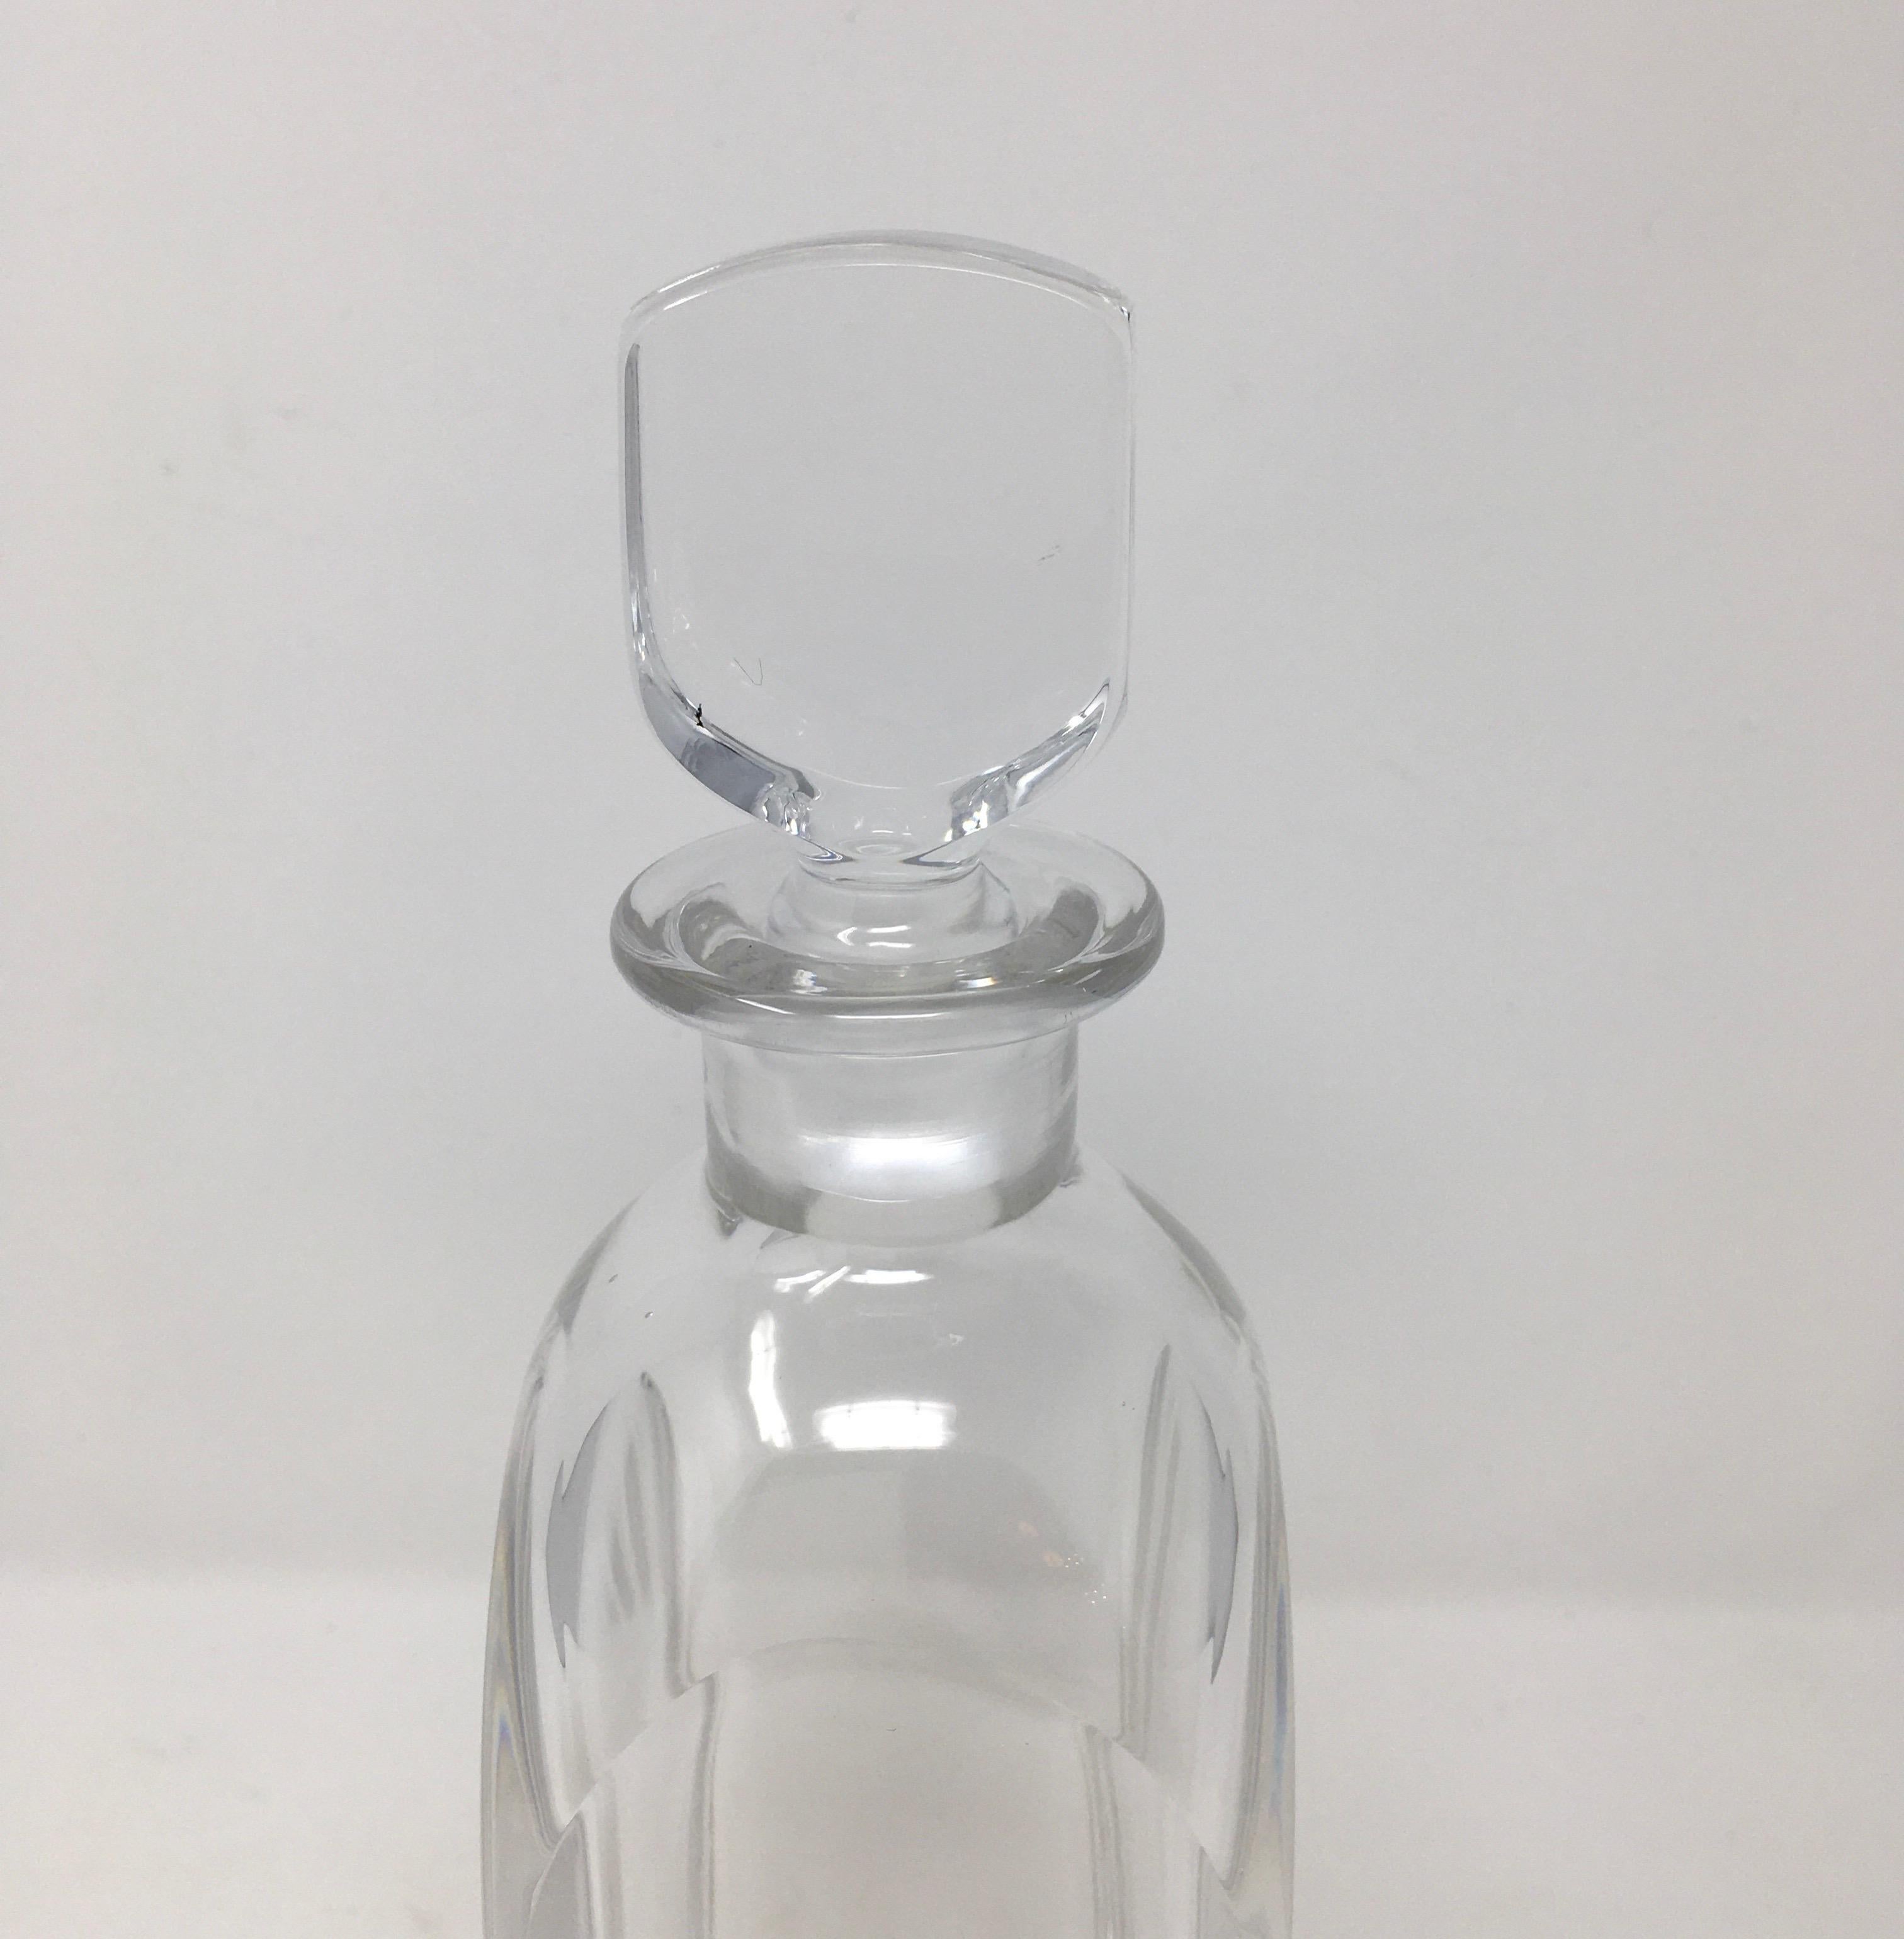 This is a 20th century crystal decanter with stopper. Made by Orrefors, Sweden. This beautiful decanter is ready for your bar or bar cart.

This piece weighs 4 lbs.